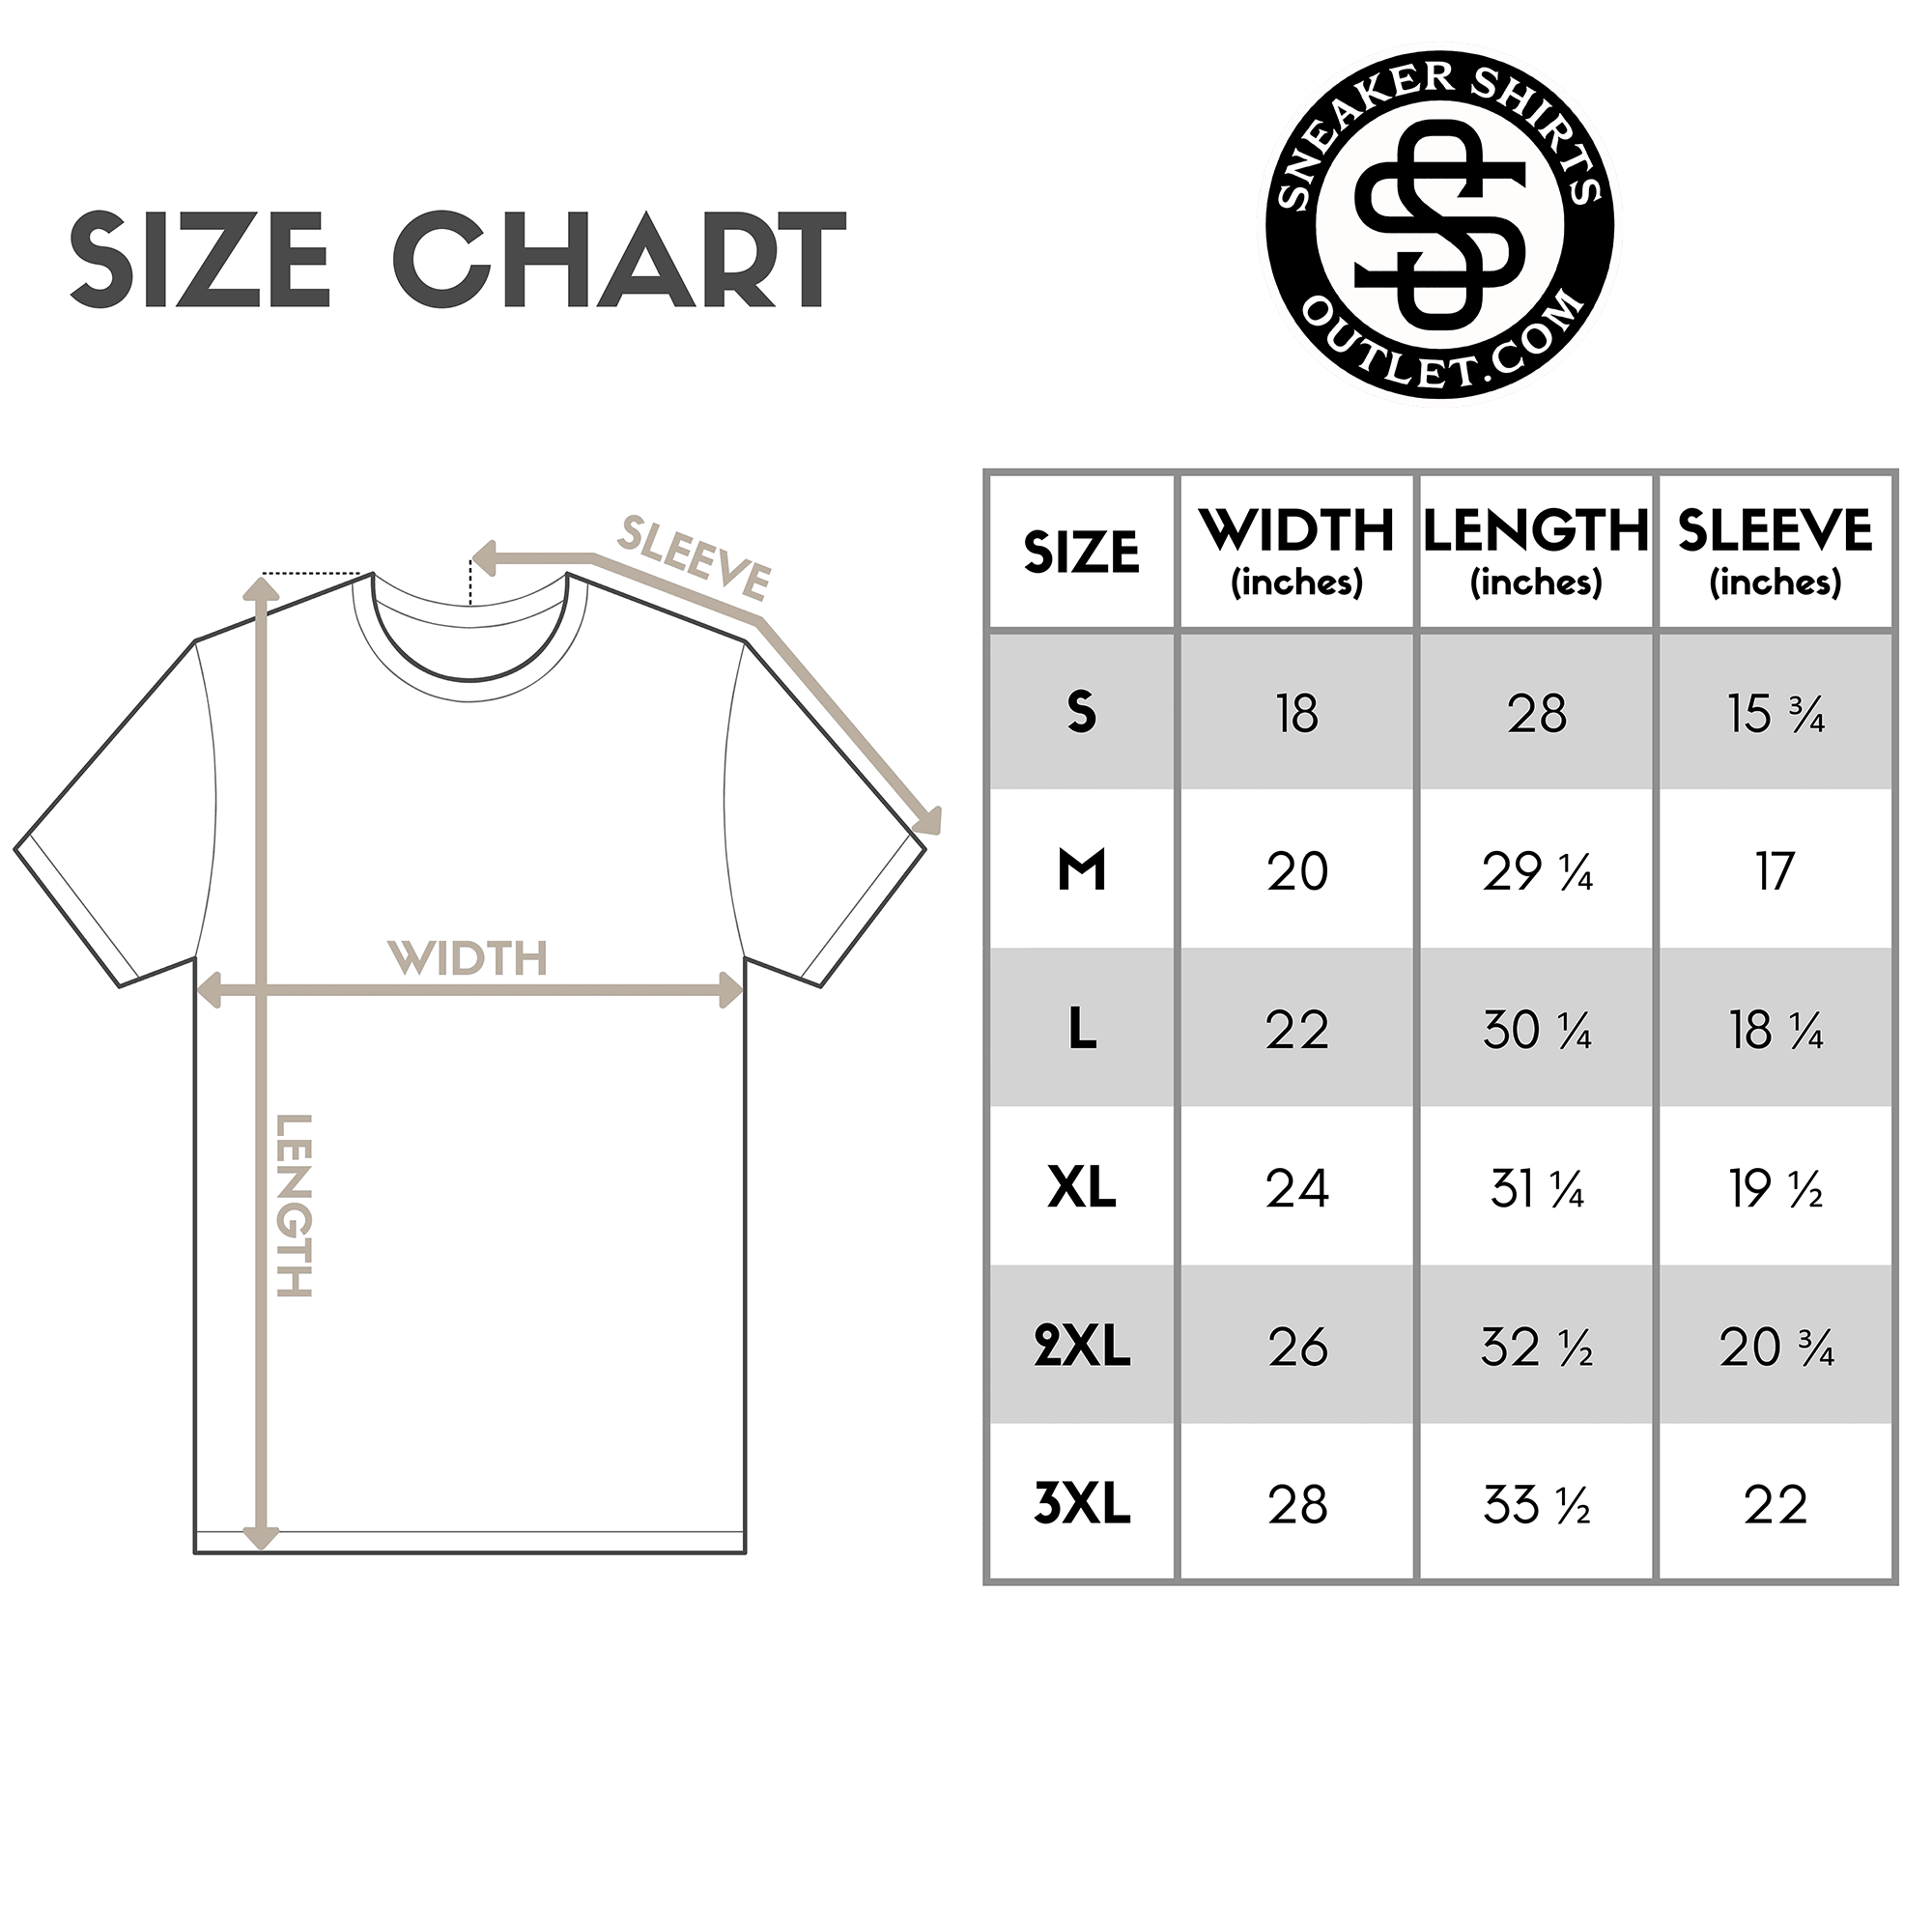 Stay True Shirt by Dope Star Clothing® size chart photo